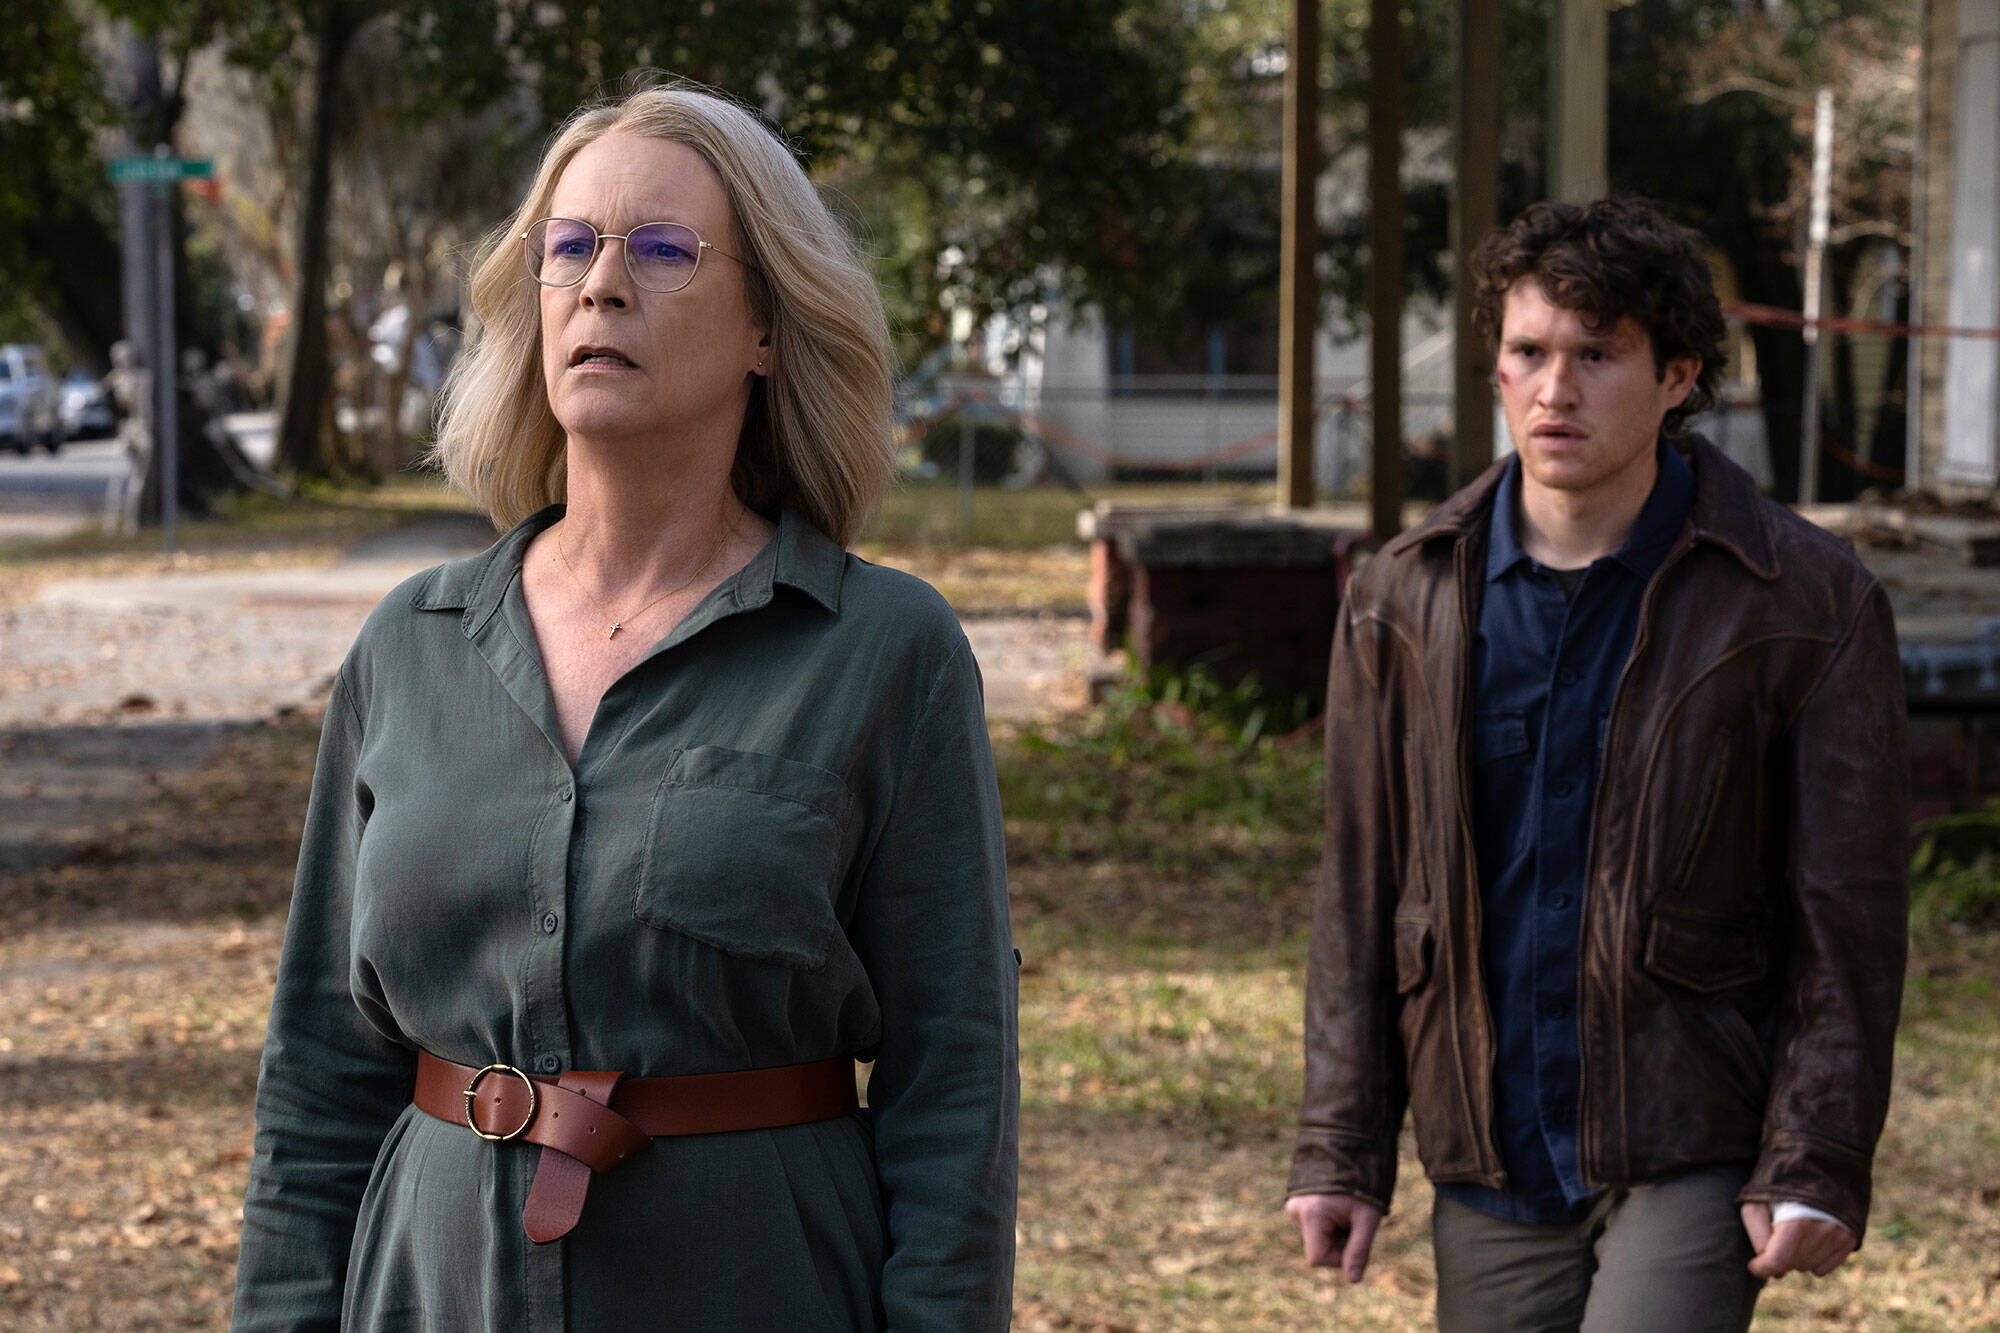 From left: Laurie Strode (Jamie Lee Curtis) and Corey (Rohan Campbell) star in Halloween Ends, co-written, produced and directed by David Gordon Green. (Image via Universal)